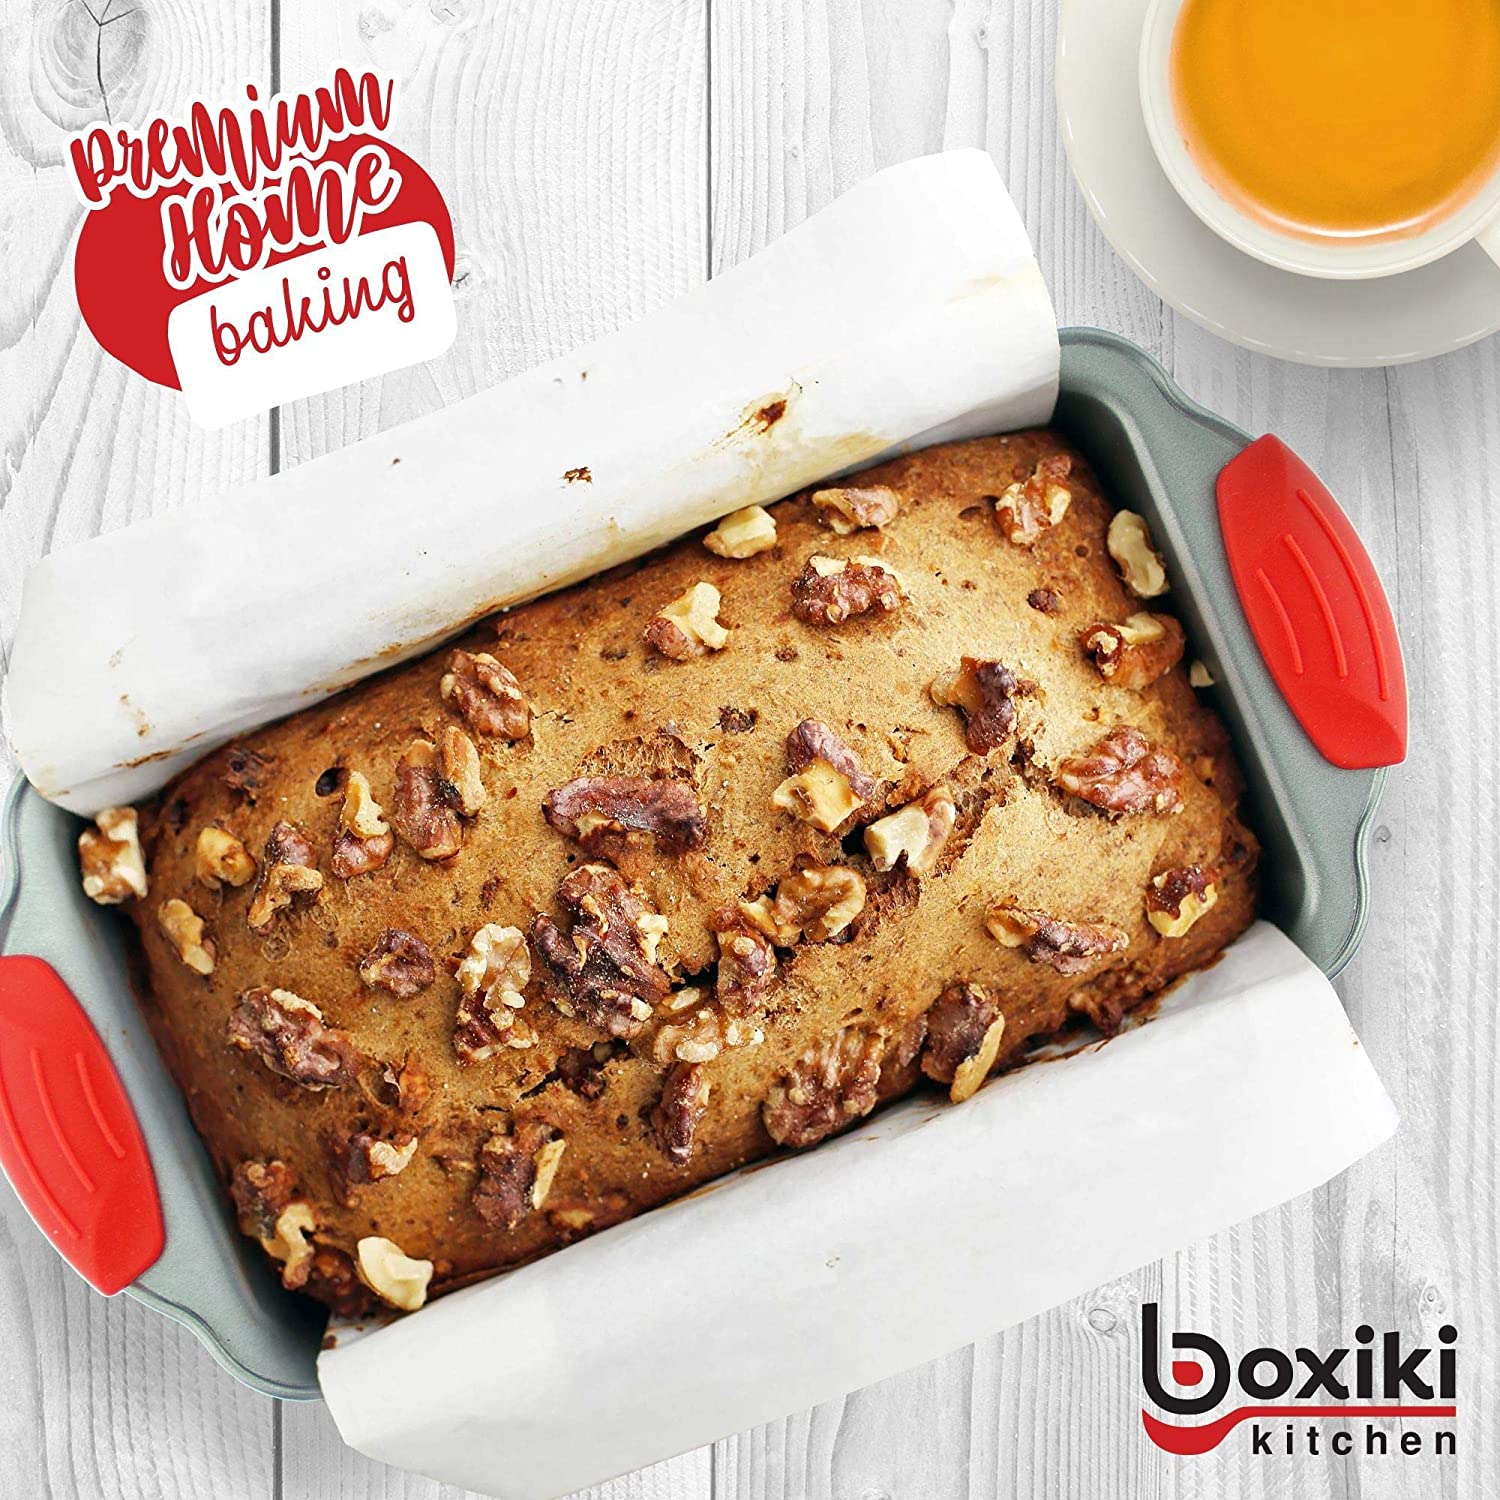 Boxiki Kitchen Non-Stick Silicone 8x8 Square Cake and Brownie Pan with Easy  Grip Steel Frame Handles - Easy to Release, Oven & Dishwasher Safe